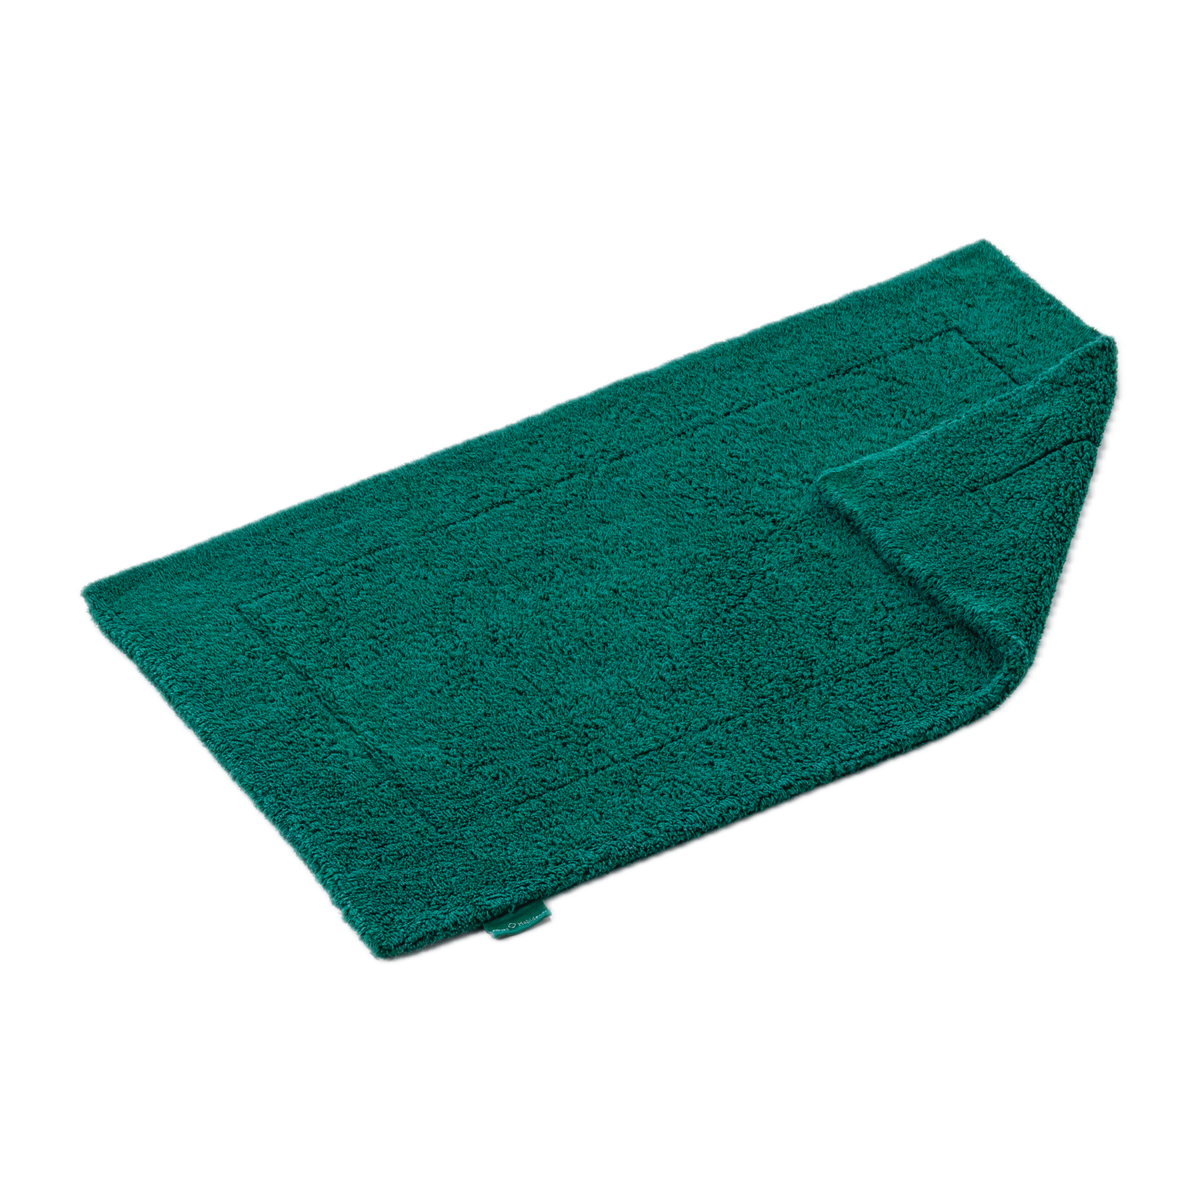 Slanted Image of Abyss Double Bath Tub Mat in British Green (298) Color with Fold